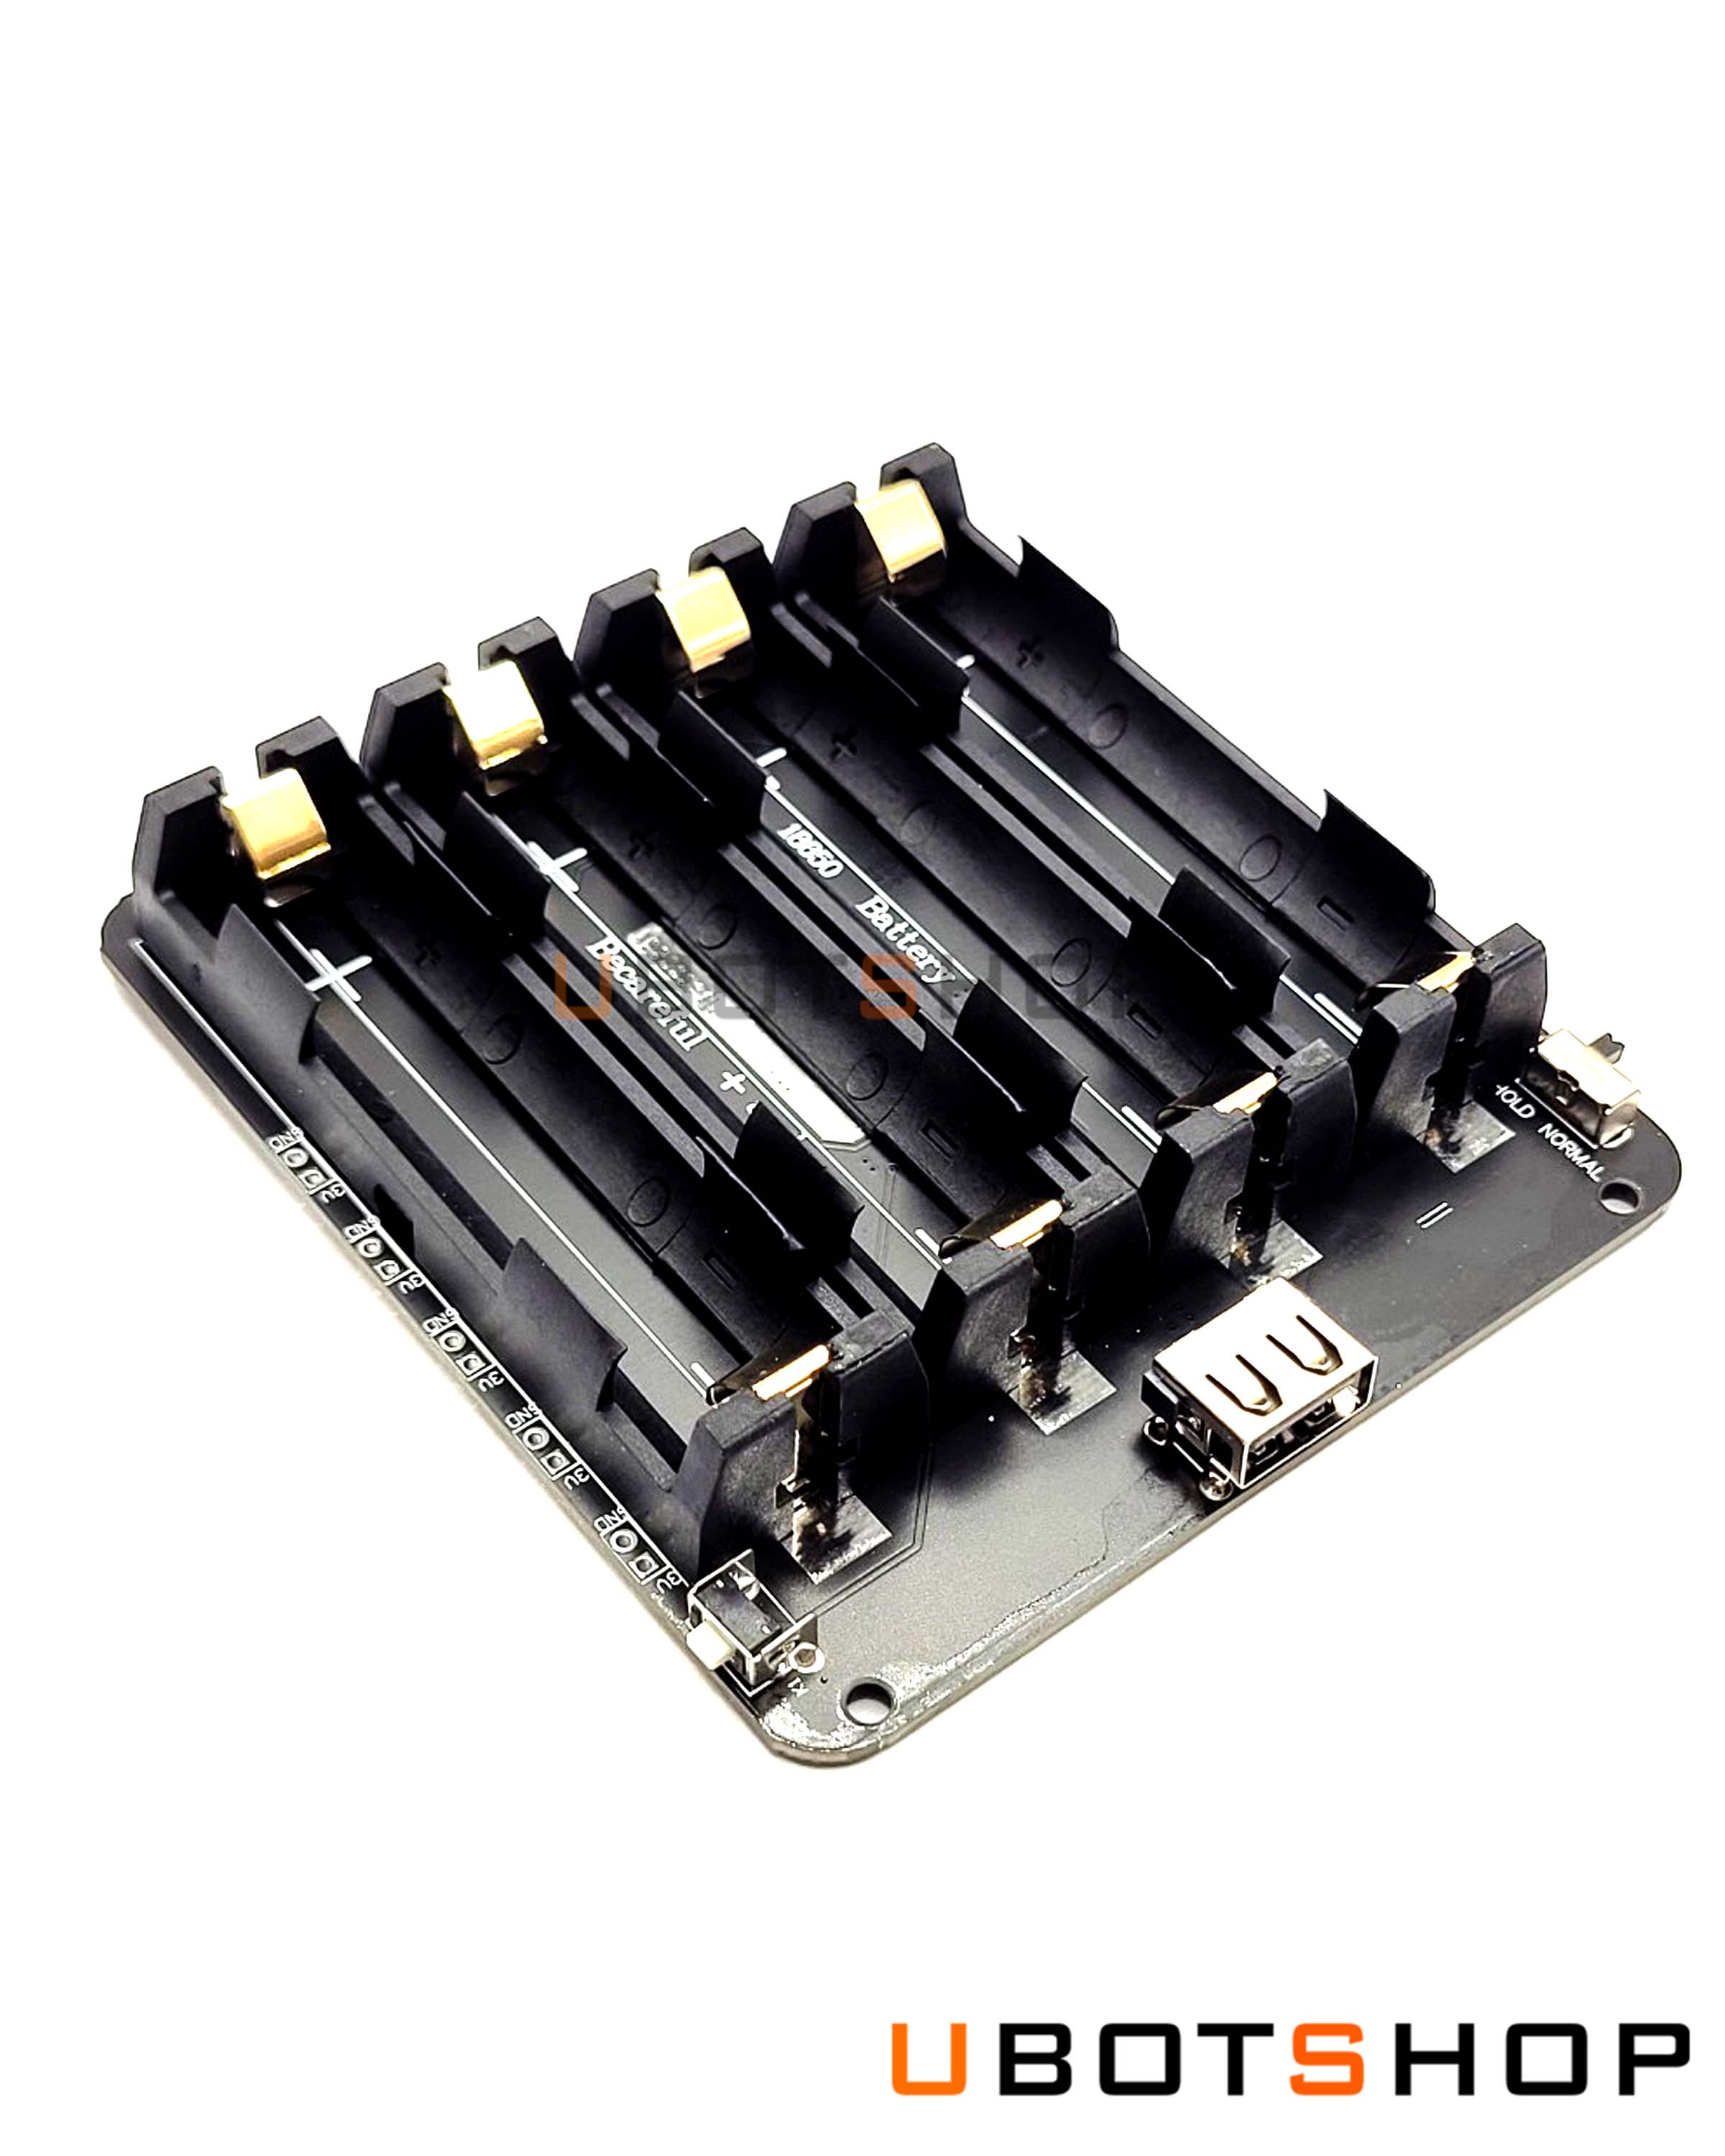 4-way 18650 battery holder V3 development board compatible with Raspberry Pi 3 overcharge(PB0009)